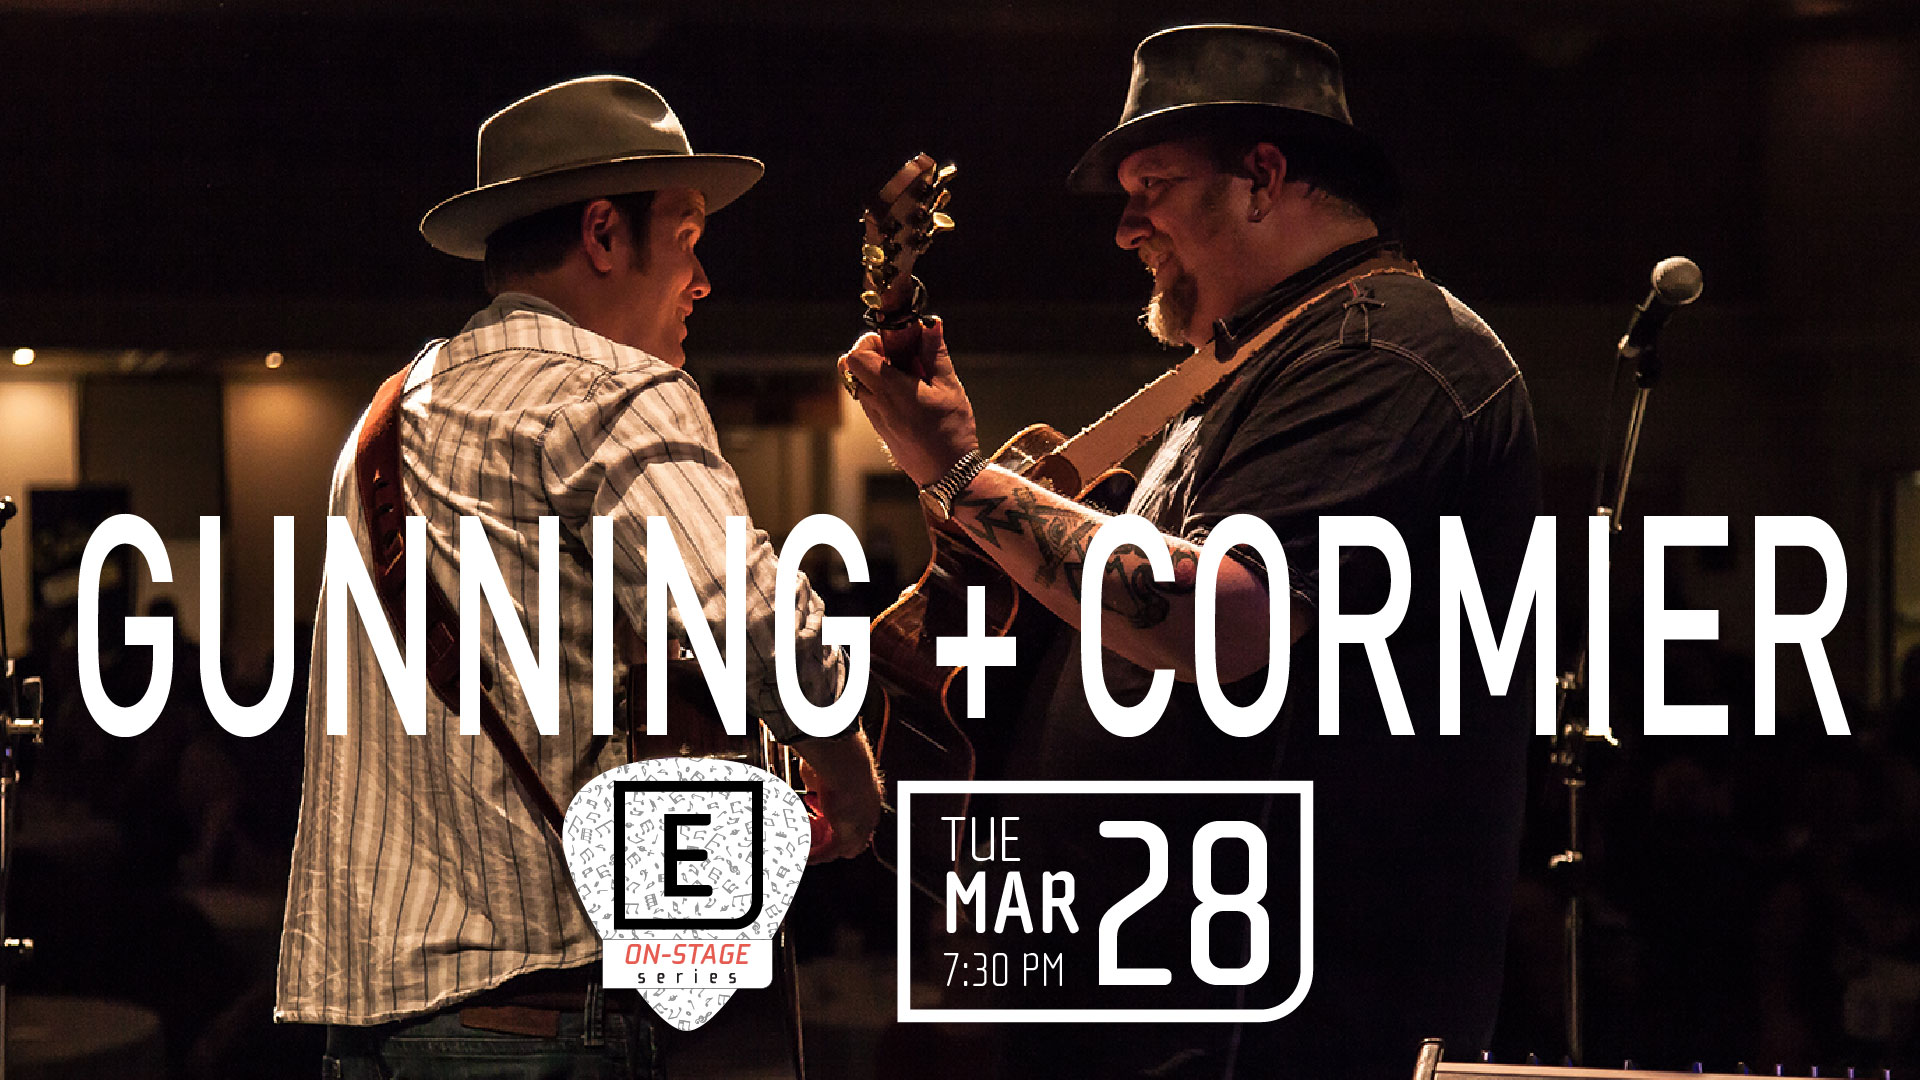 On-Stage: Gunning & Cormier